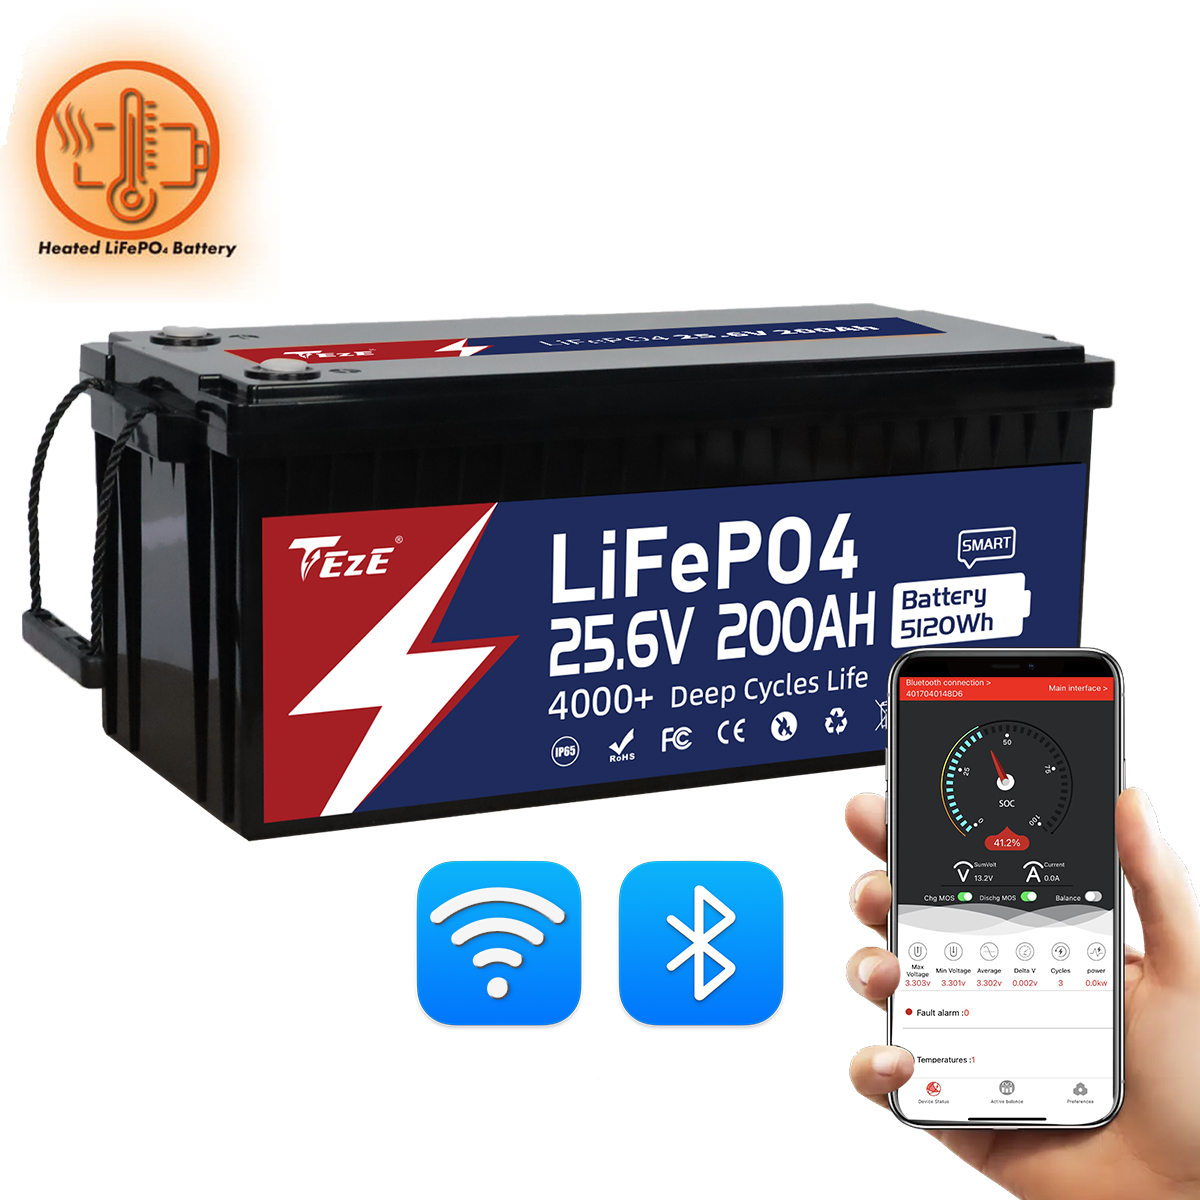 TezePower 24V 200Ah LiFePO4 Battery with WiFi and Bluetooth, RS485/RS232/CAN Communication Ports, Self-heating and Active Balancer, Built-in 200A Daly BMS(WiFi Built-in Version)-TezePower